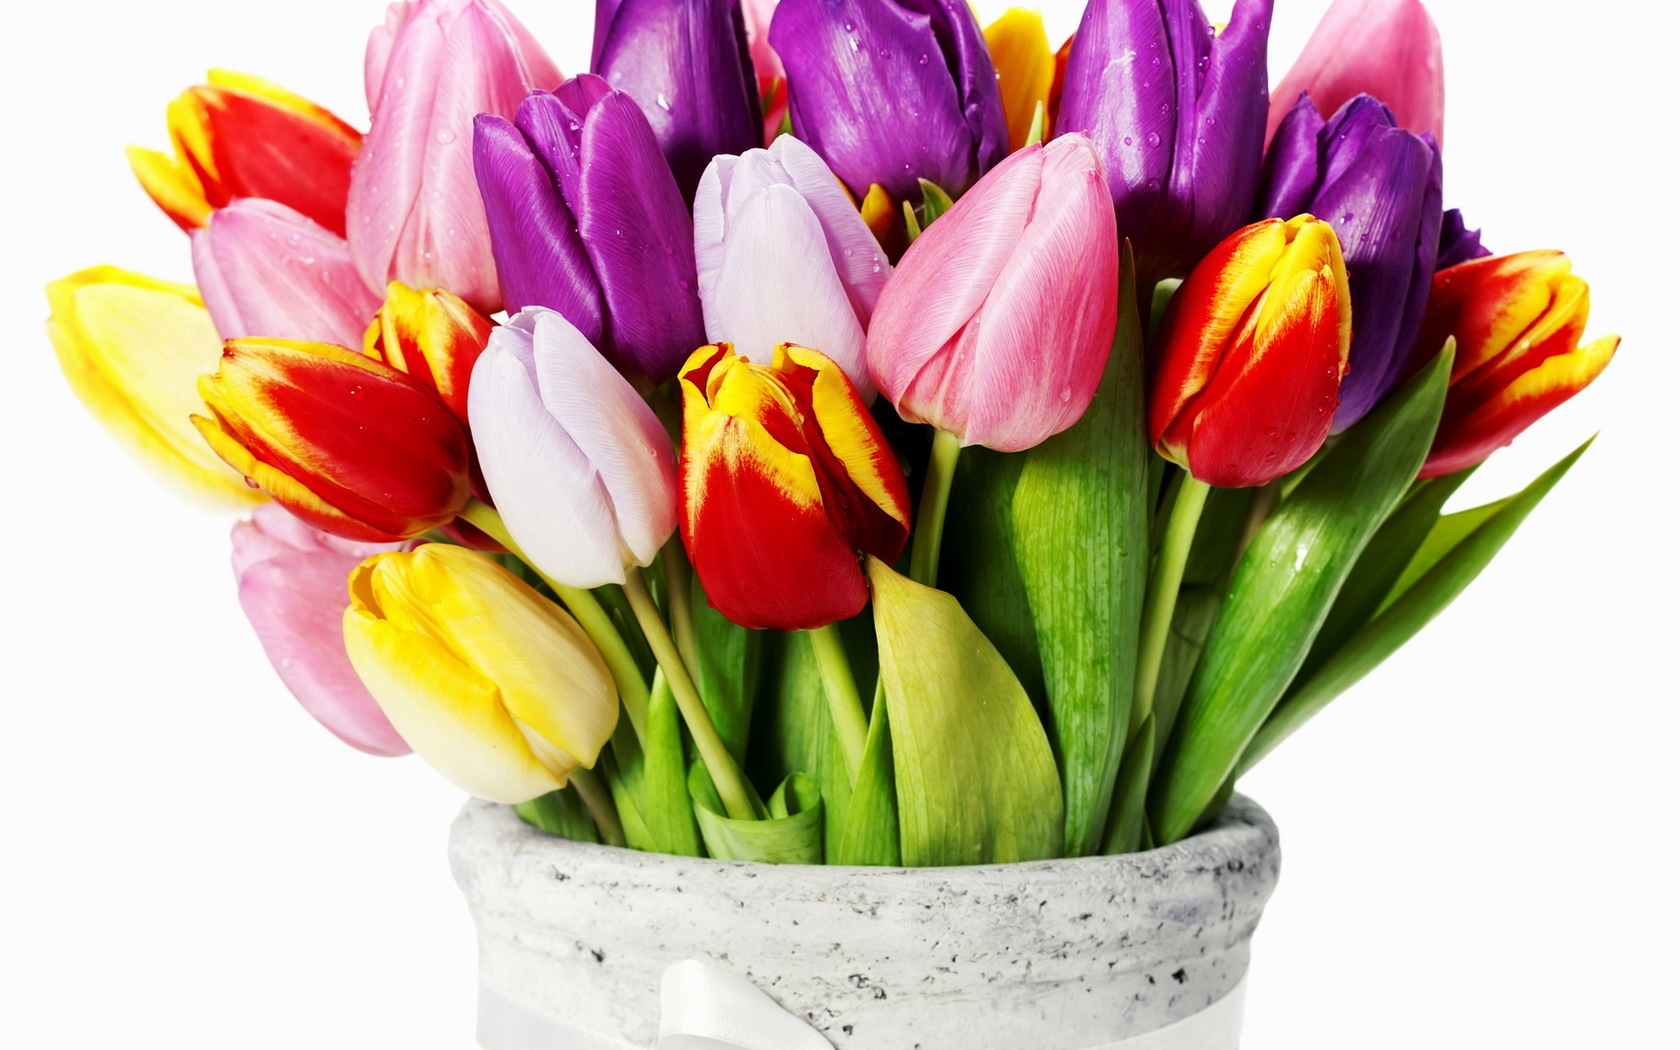 bouquets, plants, flowers, tulips wallpaper for mobile